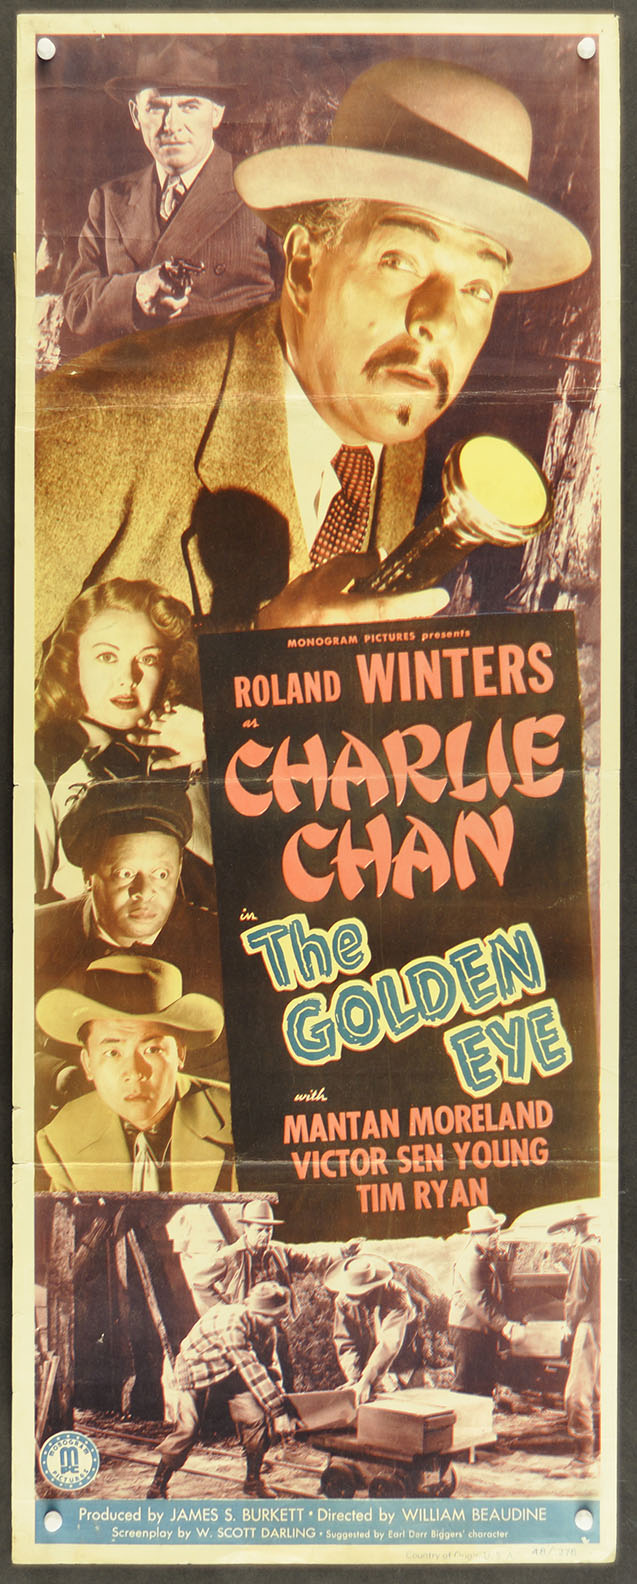 Charlie Chan And The Golden Eye